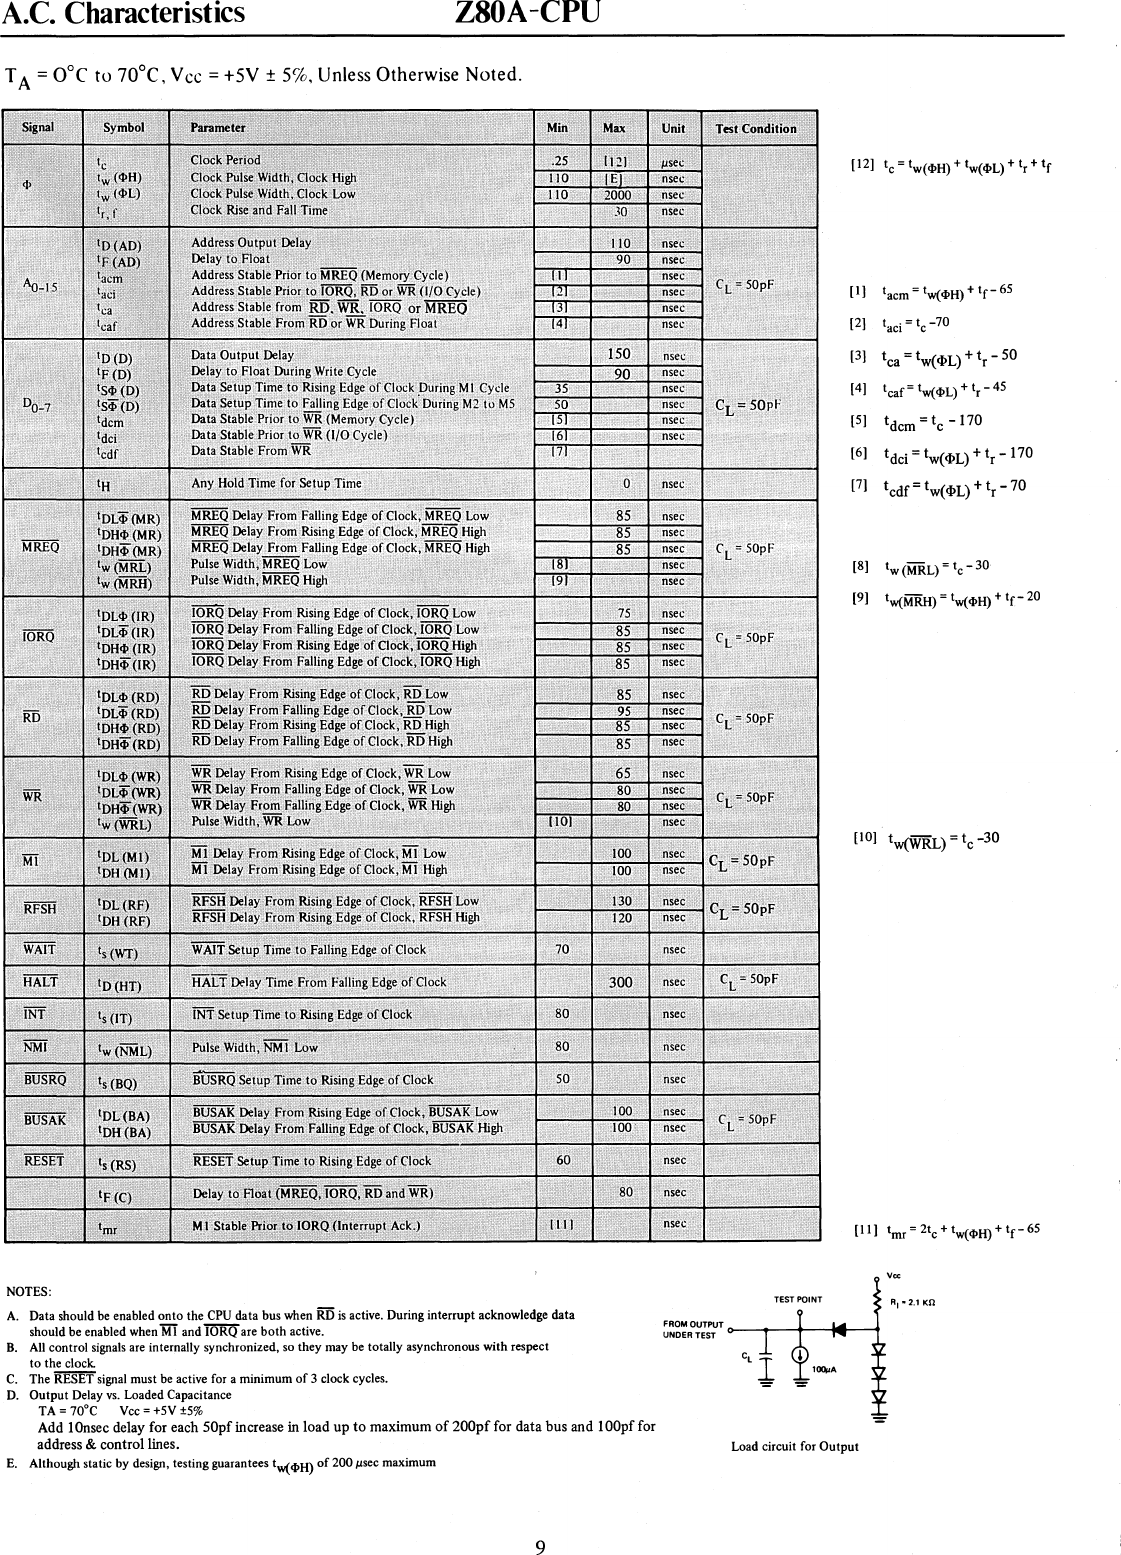 Page 9 of 10 - 03-0027-02_Z80_CPU_Product_Specification_Mar78 03-0027-02 Z80 CPU Product Specification Mar78